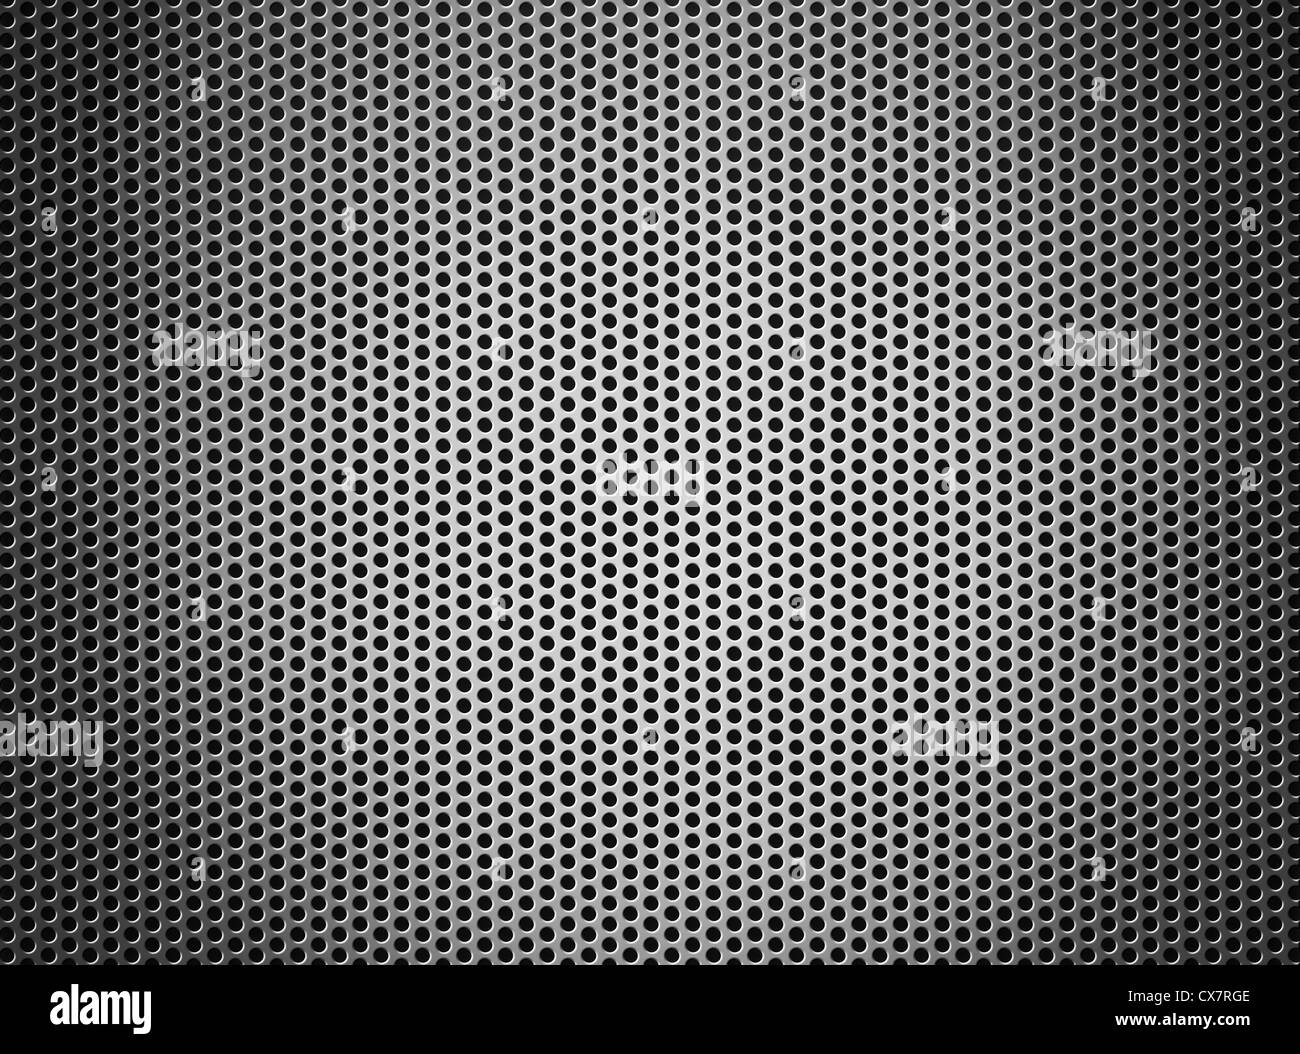 silver metal grate background Stock Photo